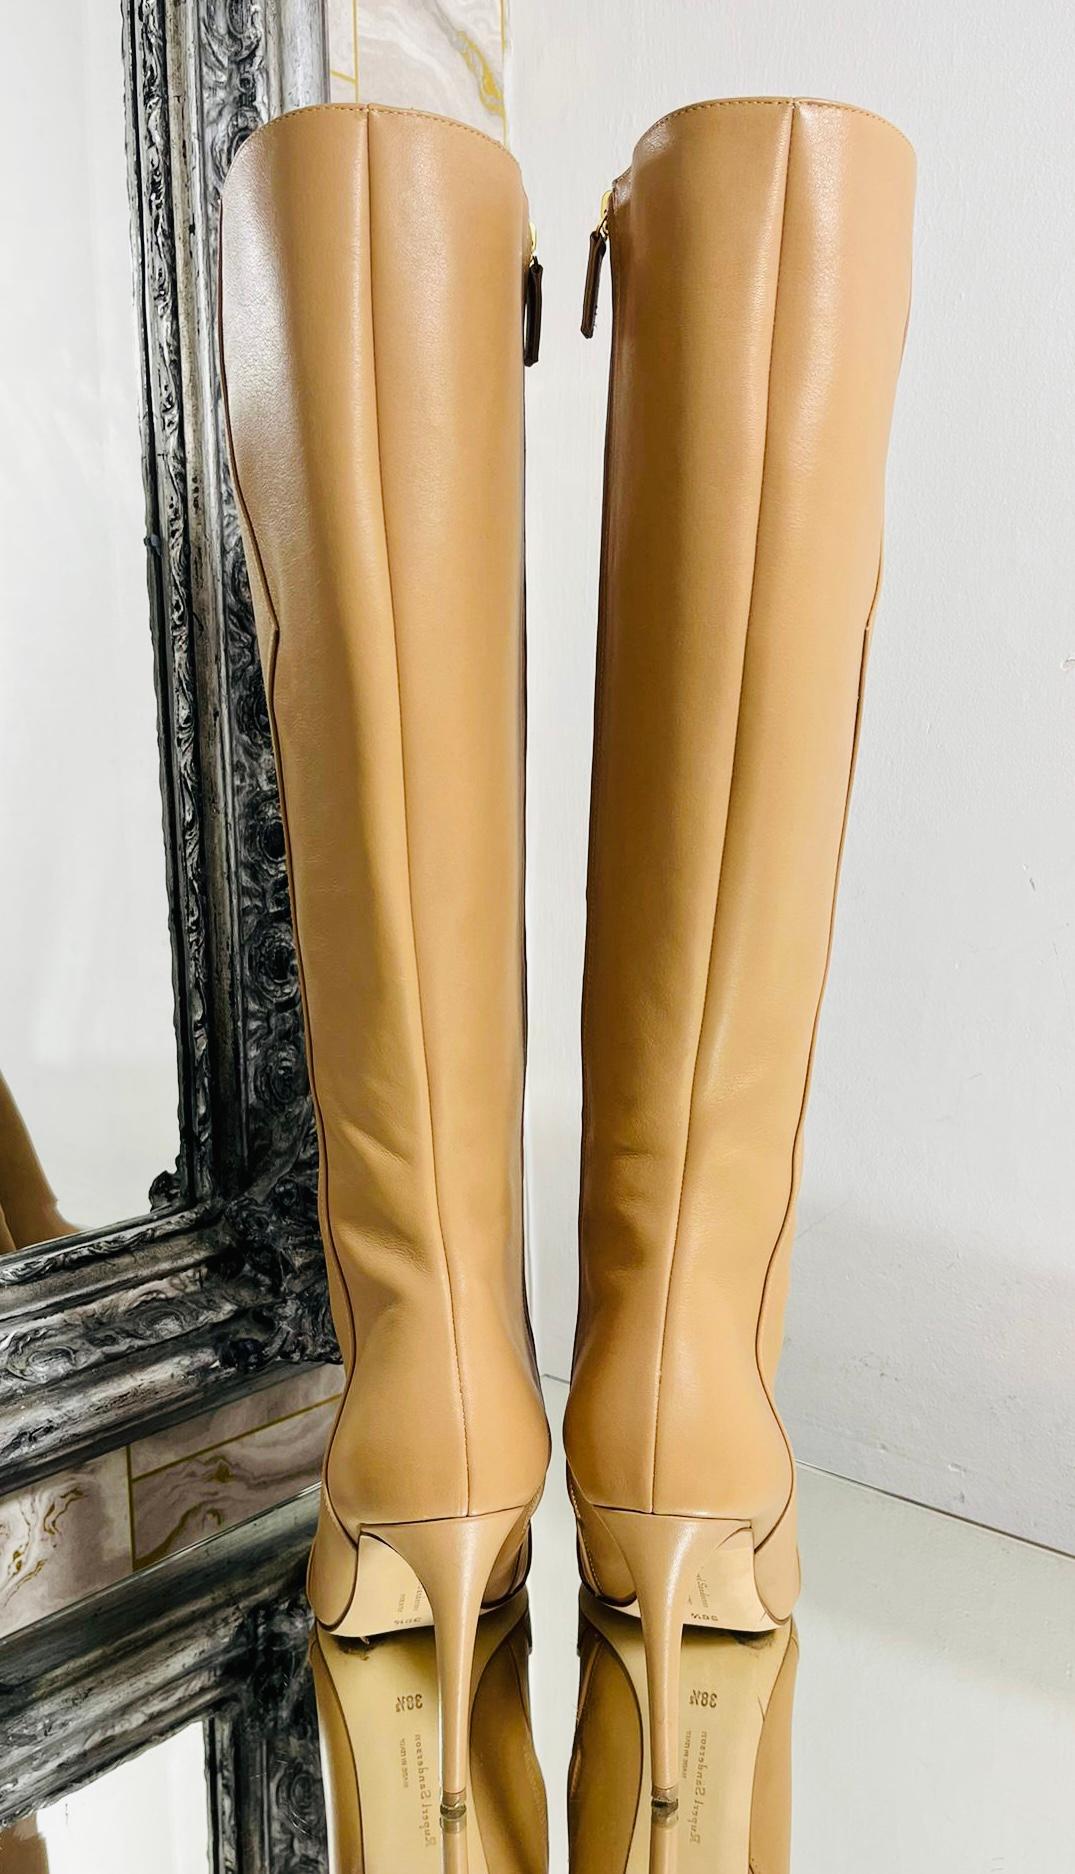 Rupert Sanderson Calfskin Knee High Boots In Excellent Condition For Sale In London, GB